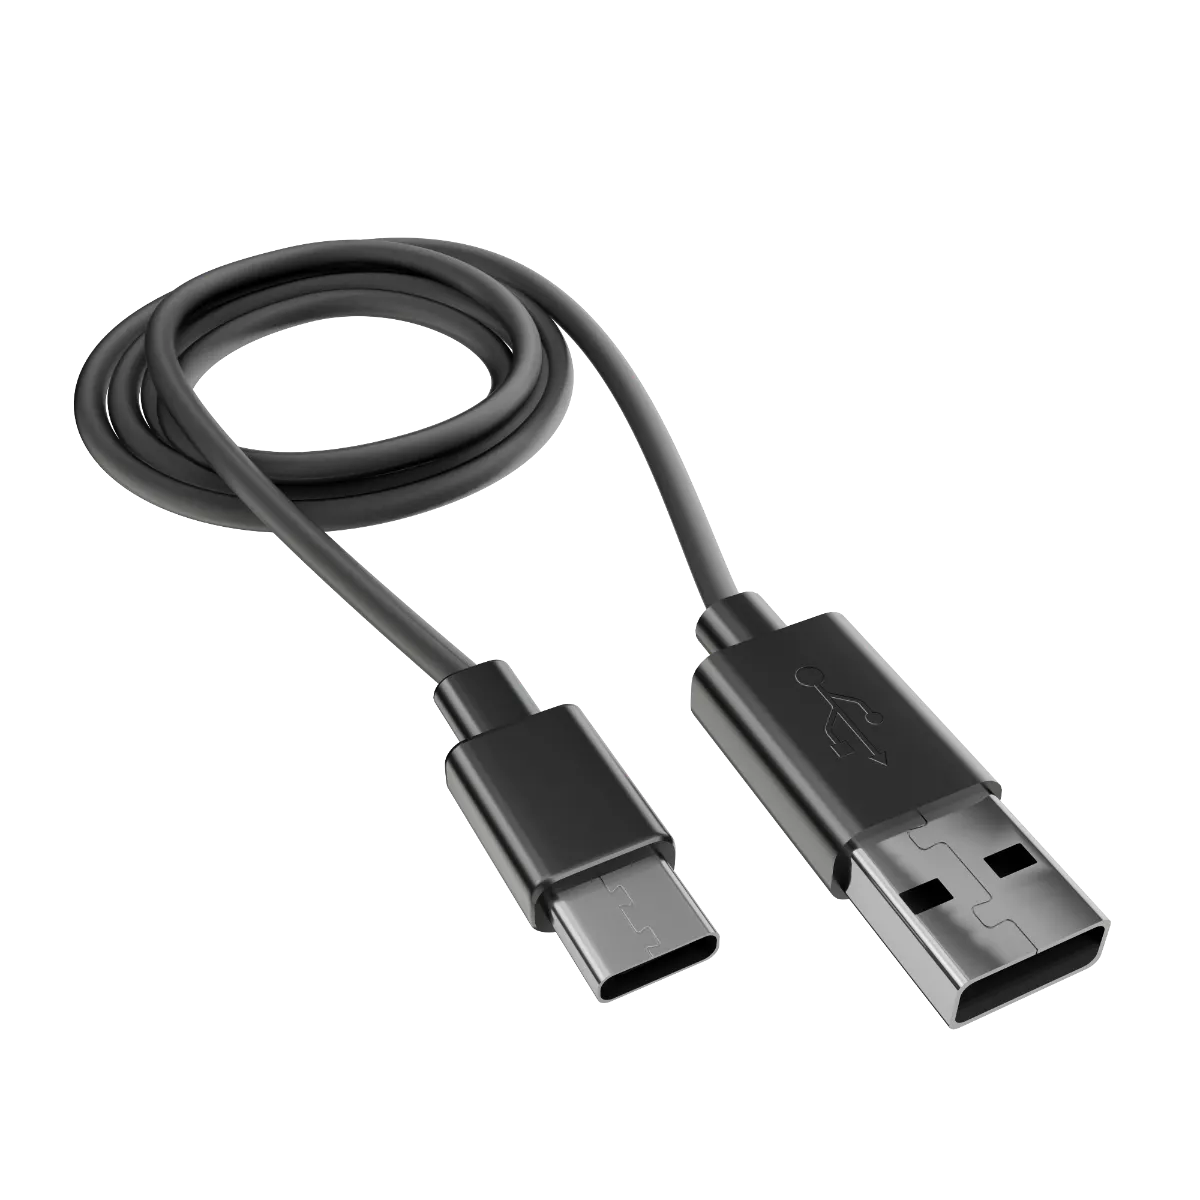 Buy a Ploom X USB charging cable